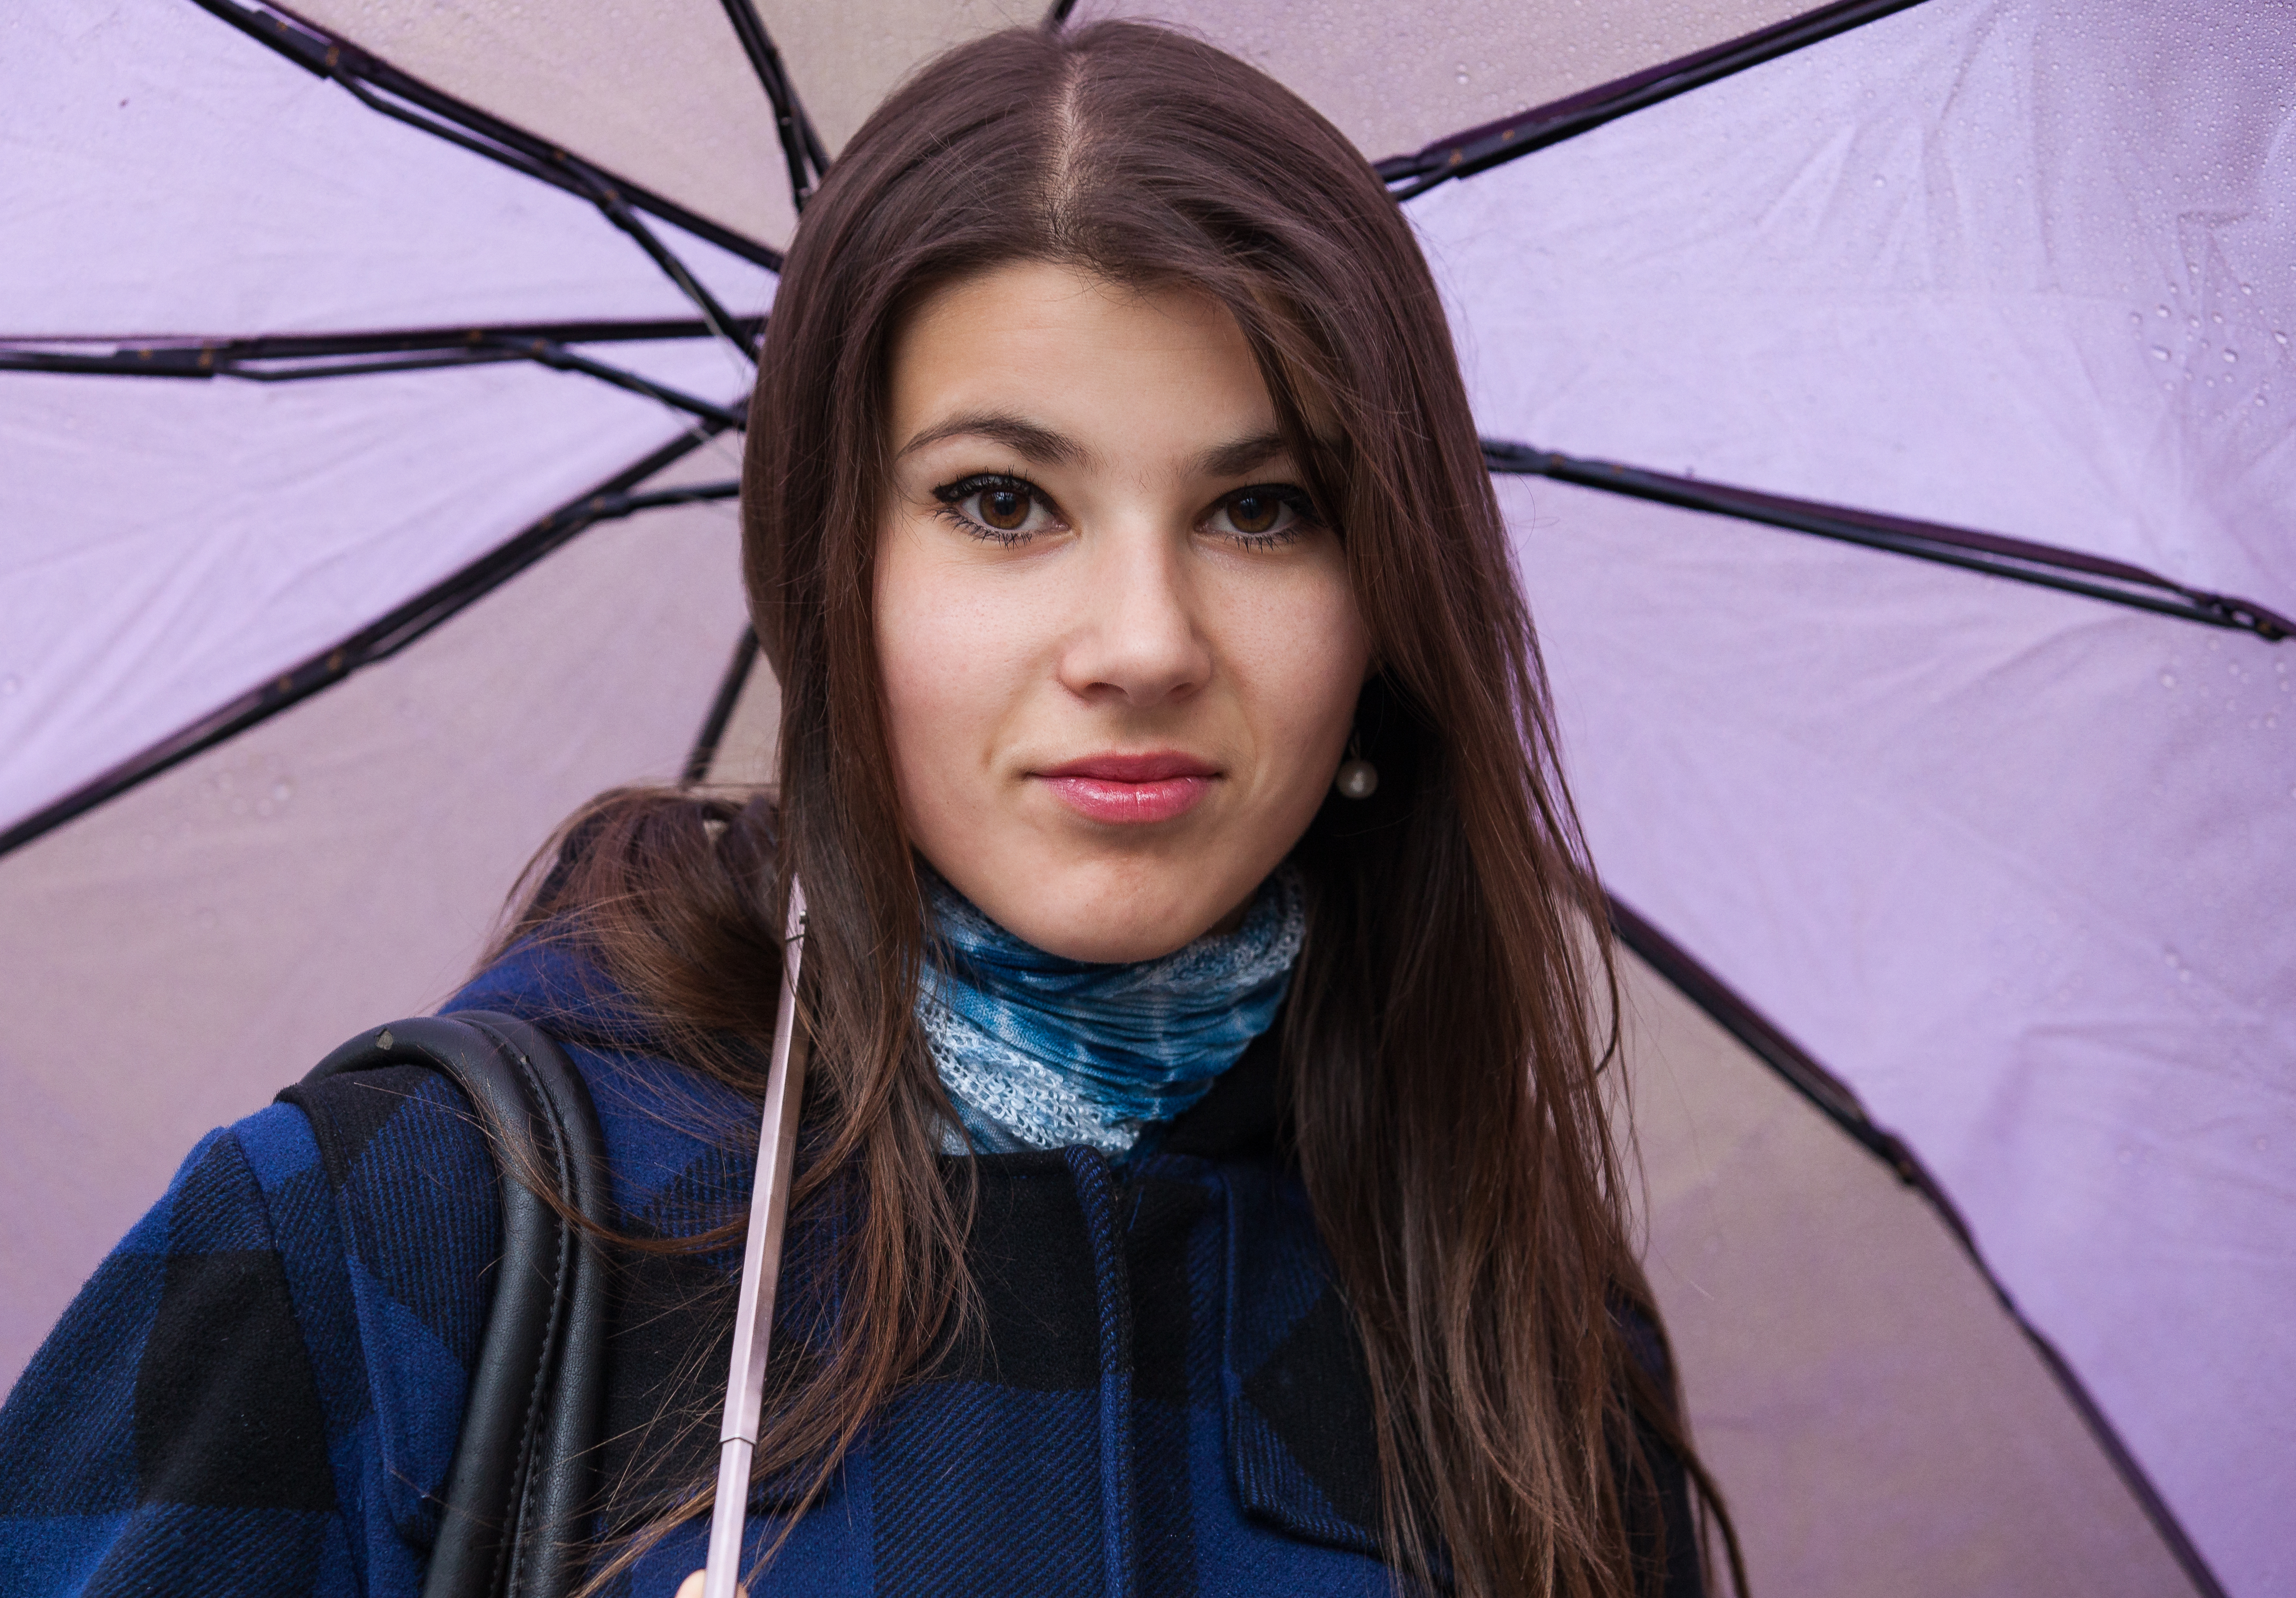 an exceptionally beautiful brunette Catholic girl holding an umbrella, photographed in November 2013, picture 1 out of 19